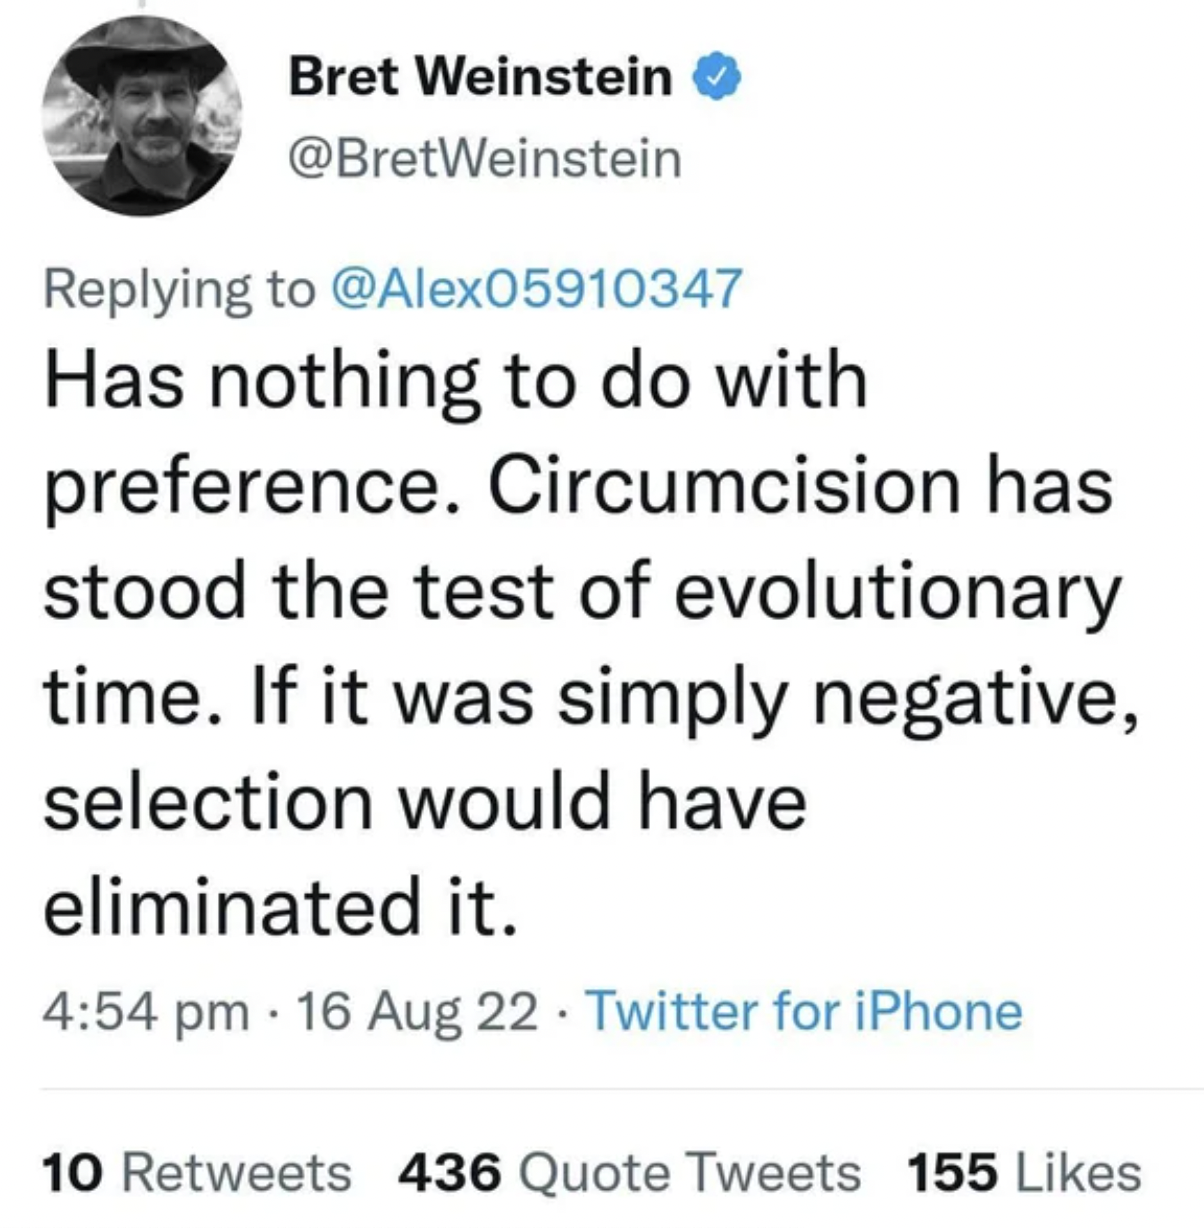 People who were confidently incorrect - Has nothing to do with preference. Circumcision has stood the test of evolutionary time. If it was simply negative, selection would have eliminated it.